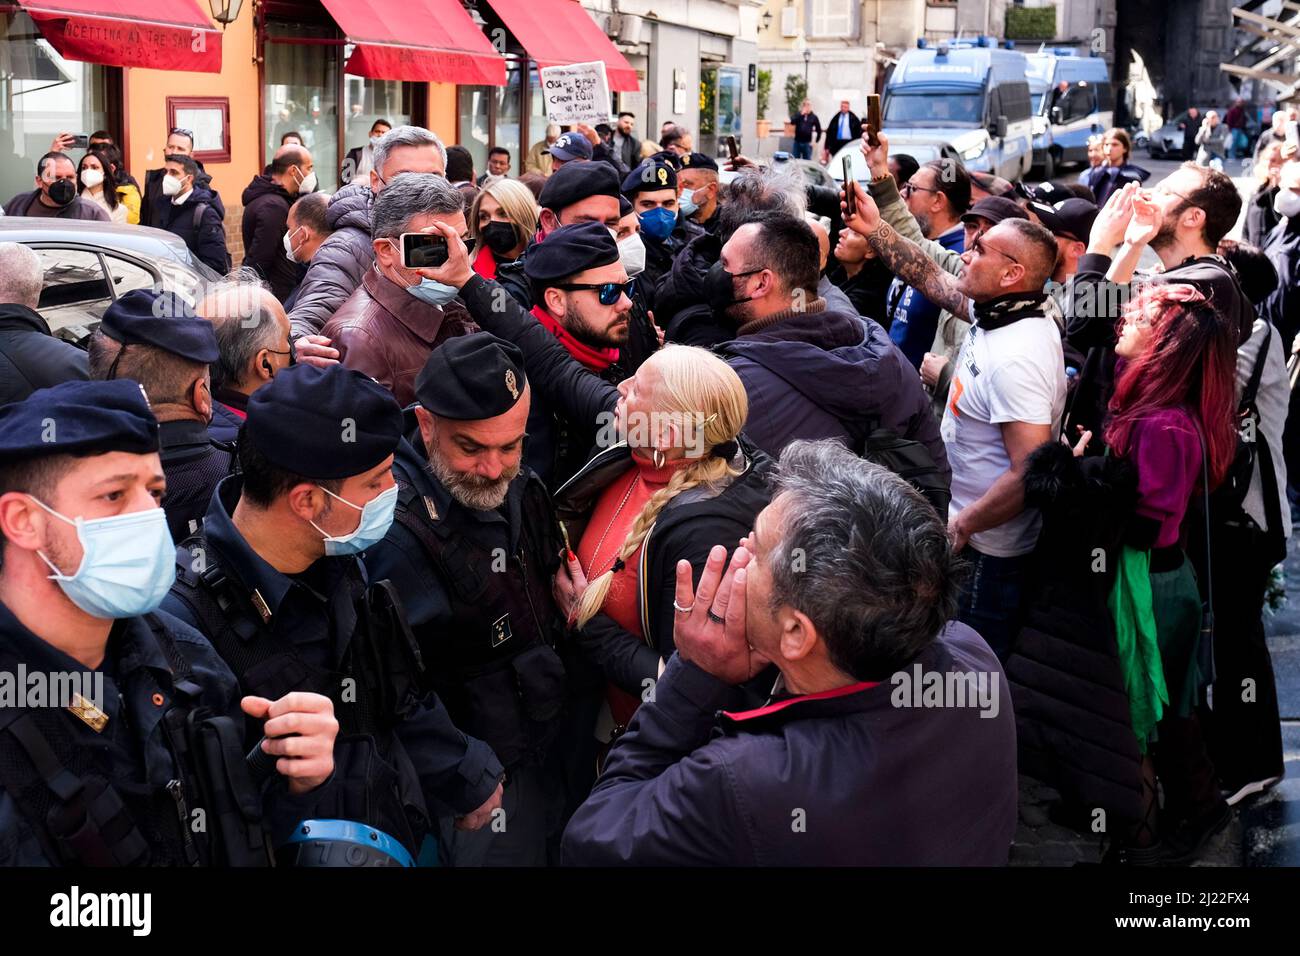 Mario Draghi outside a historic Neapolitan pizzeria is protested against by demonstrators, on the day of the signing of the pact for Naples, an agreement between the government and the city of Naples under which the state will pay about Û1.3 billion into the city's coffers over 20 years. Stock Photo